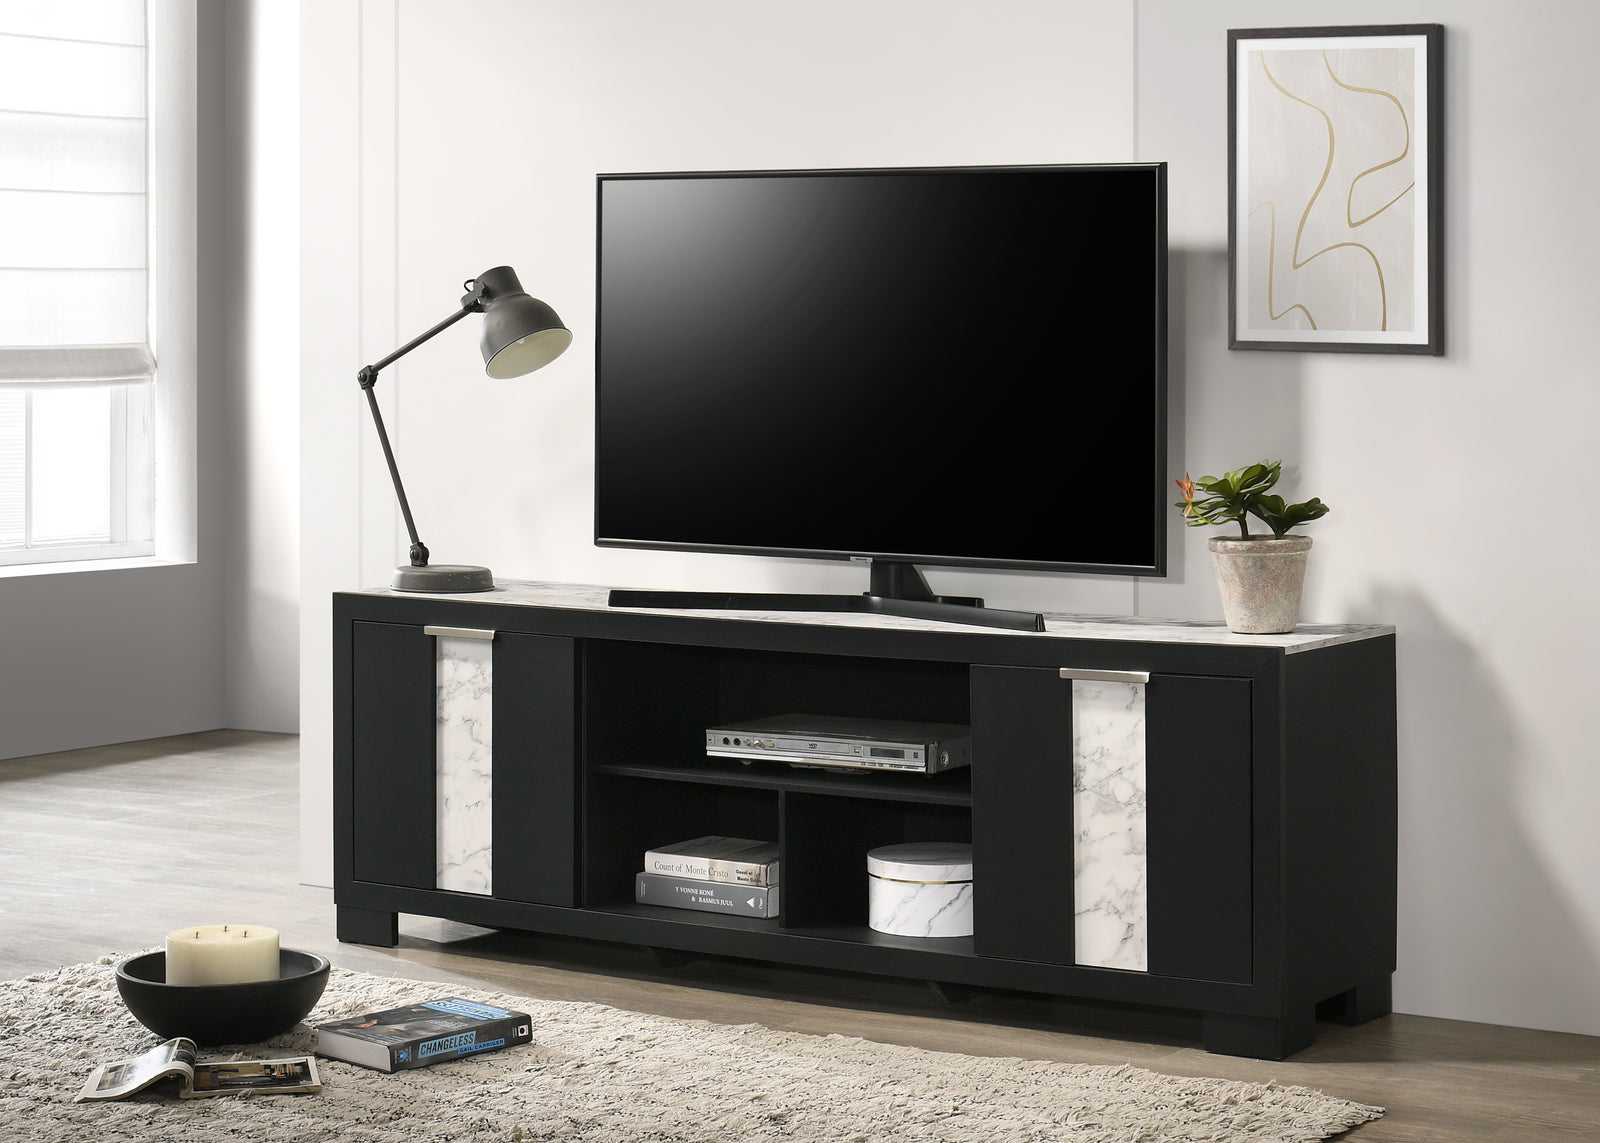 Rangley Black Modern Contemporary Solid Wood Marble Top Storage Tv Stand